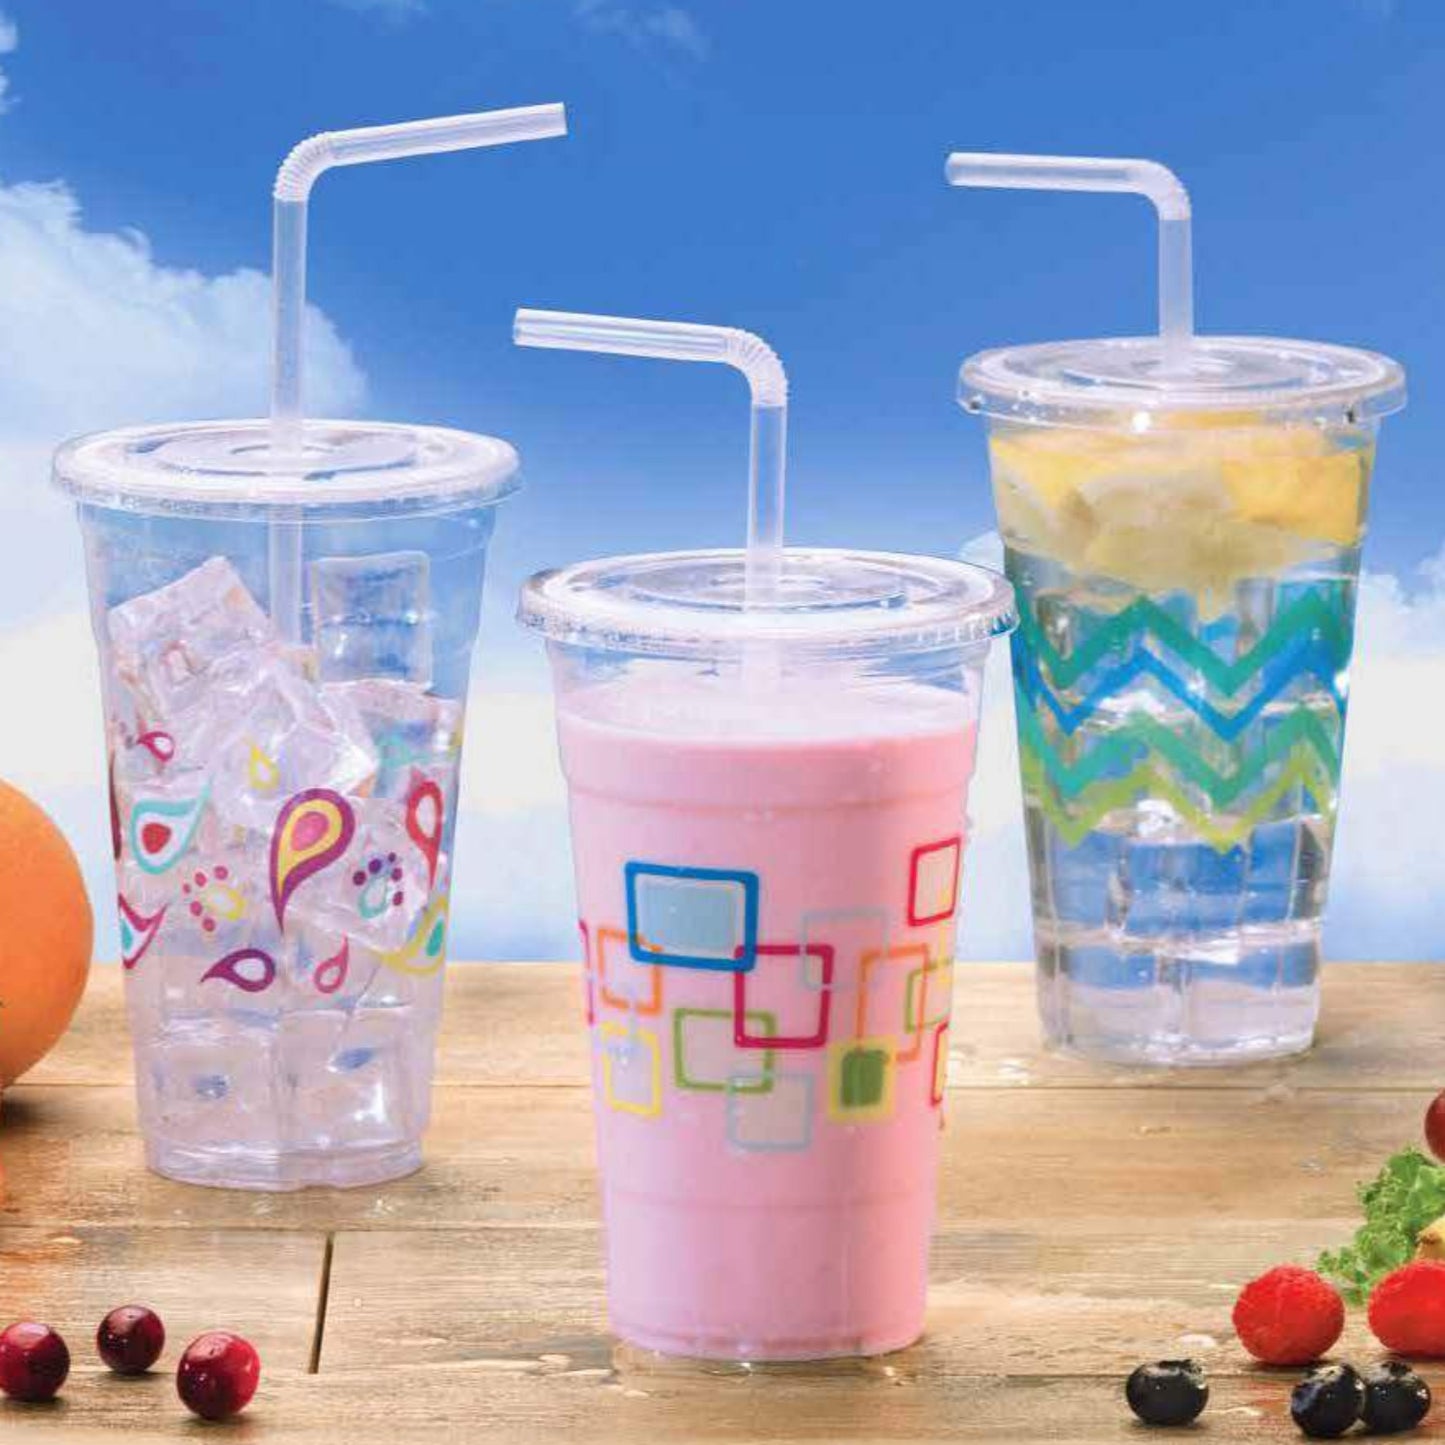 Nicole home Collection Premium Plastic Chevron Cups with Lids and Straws 24 oz Smoothie Cups OnlyOneStopShop   